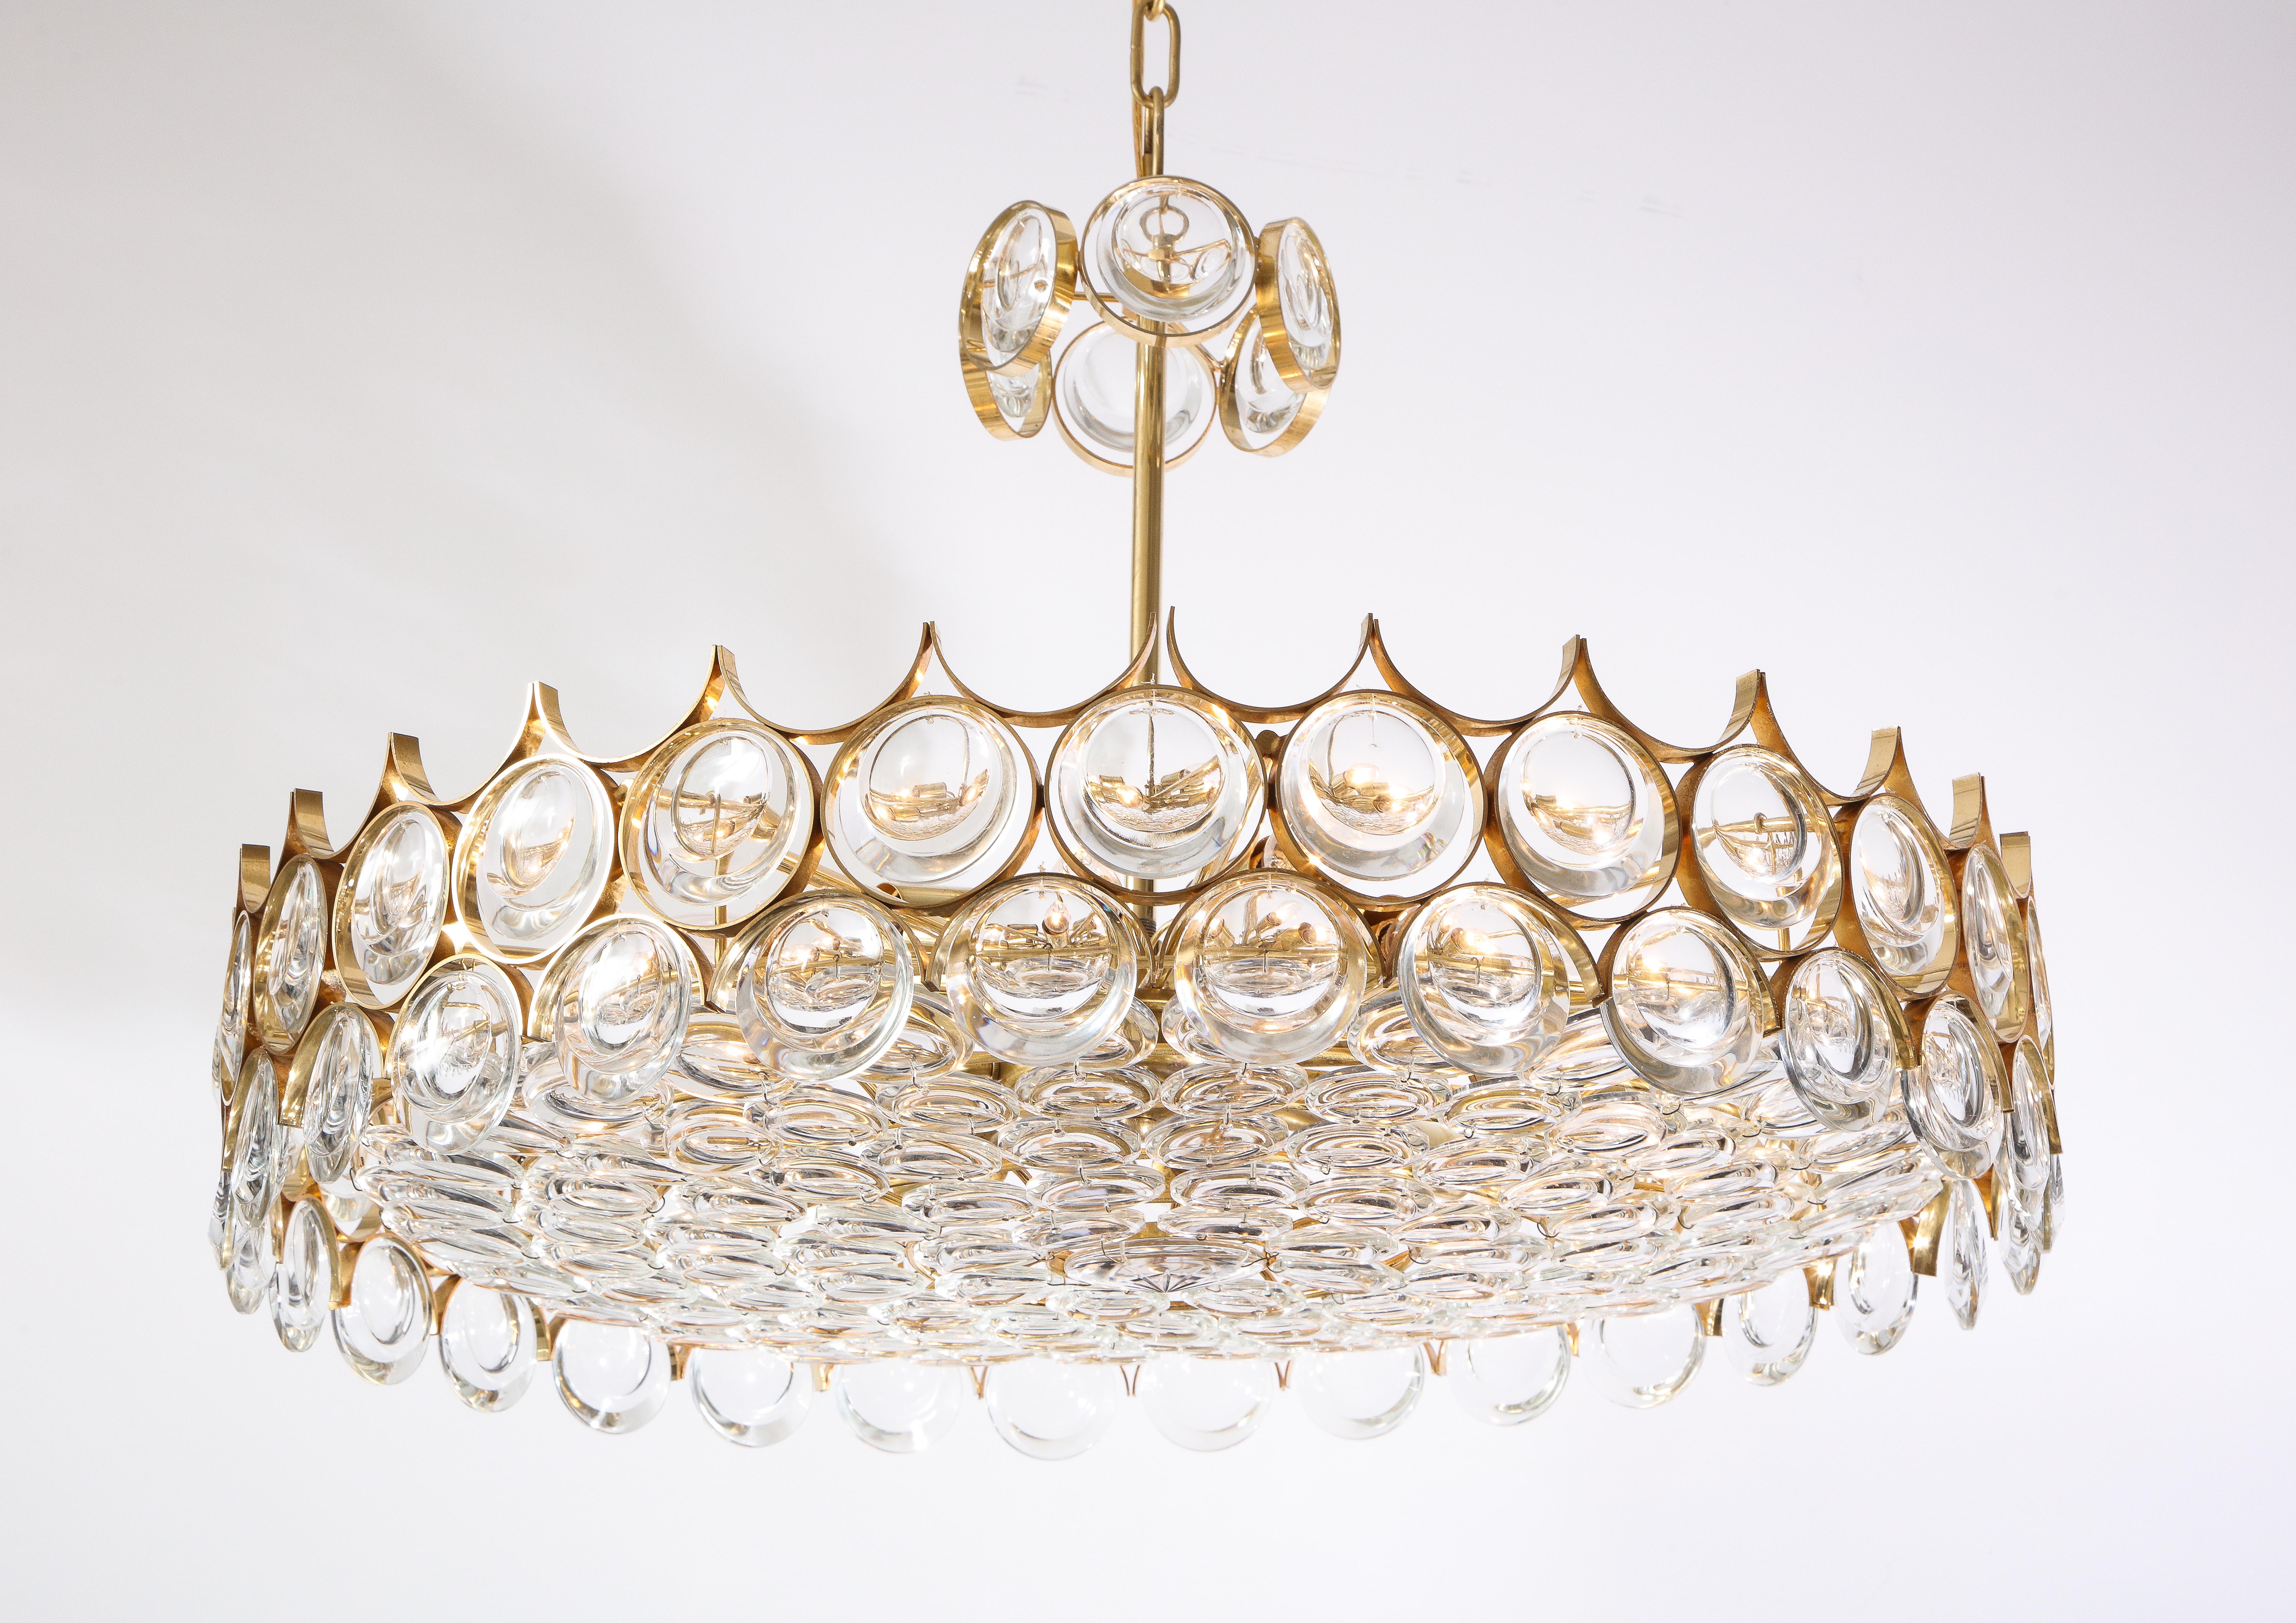 A large circular brass and glass chandelier designed by Ernest Palme for Palwa with 12 newly wired sockets, featuring large faceted crystals each encased in  gold plated frames suspended from a pole and chain with a glass canopy  lending itself to